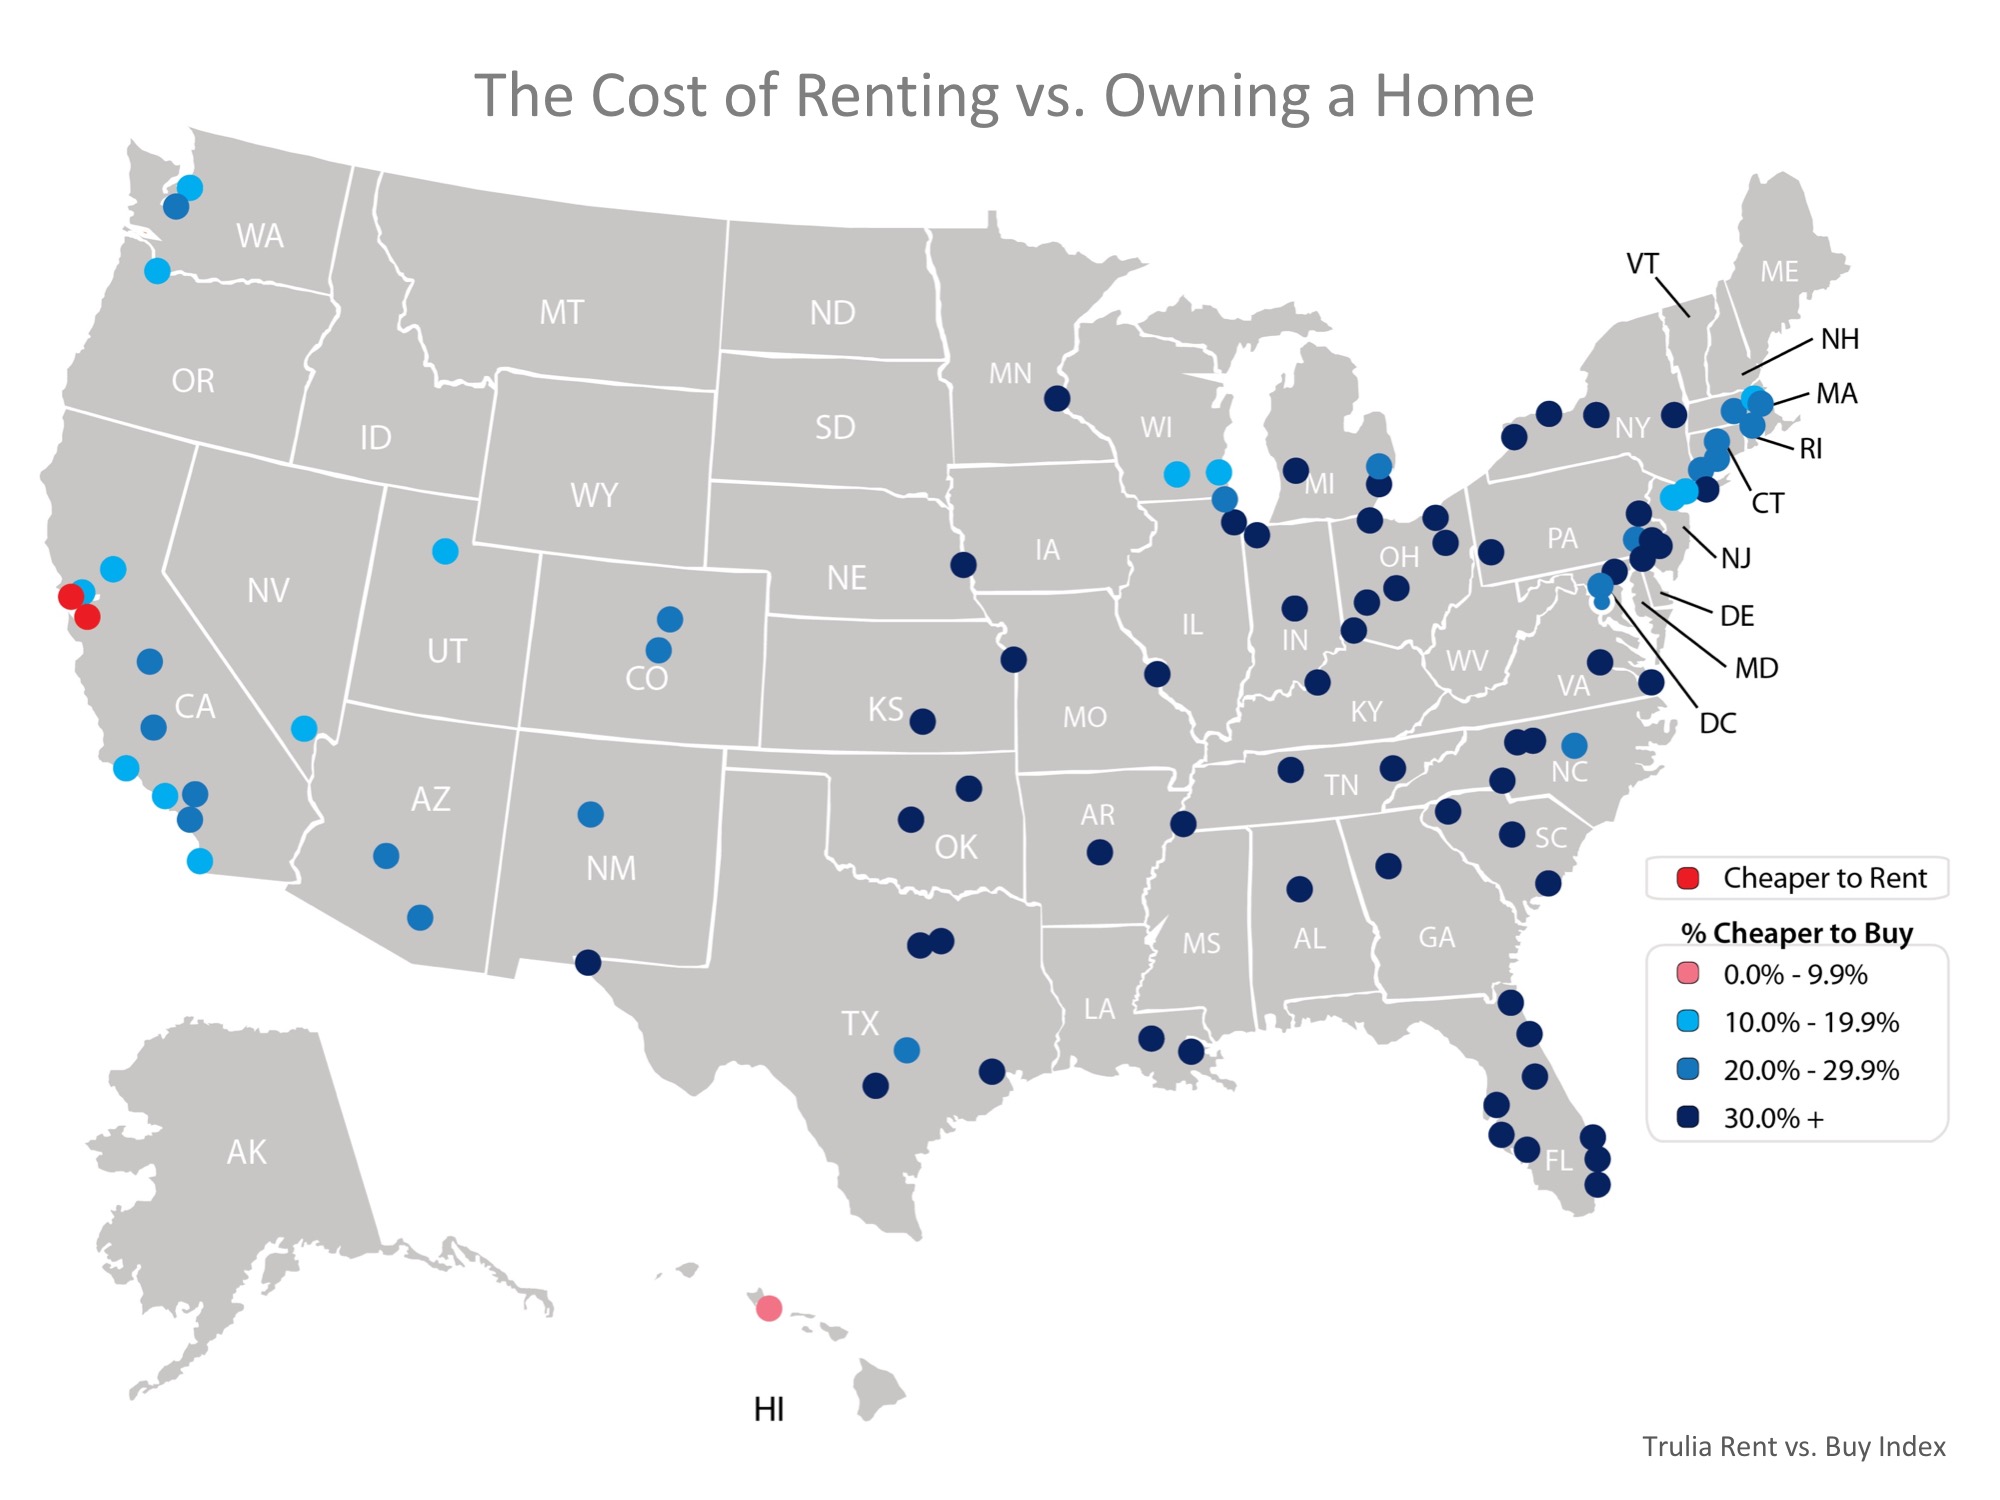 Buying Is Now 26.3% Cheaper Than Renting in the US | Simplifying The Market